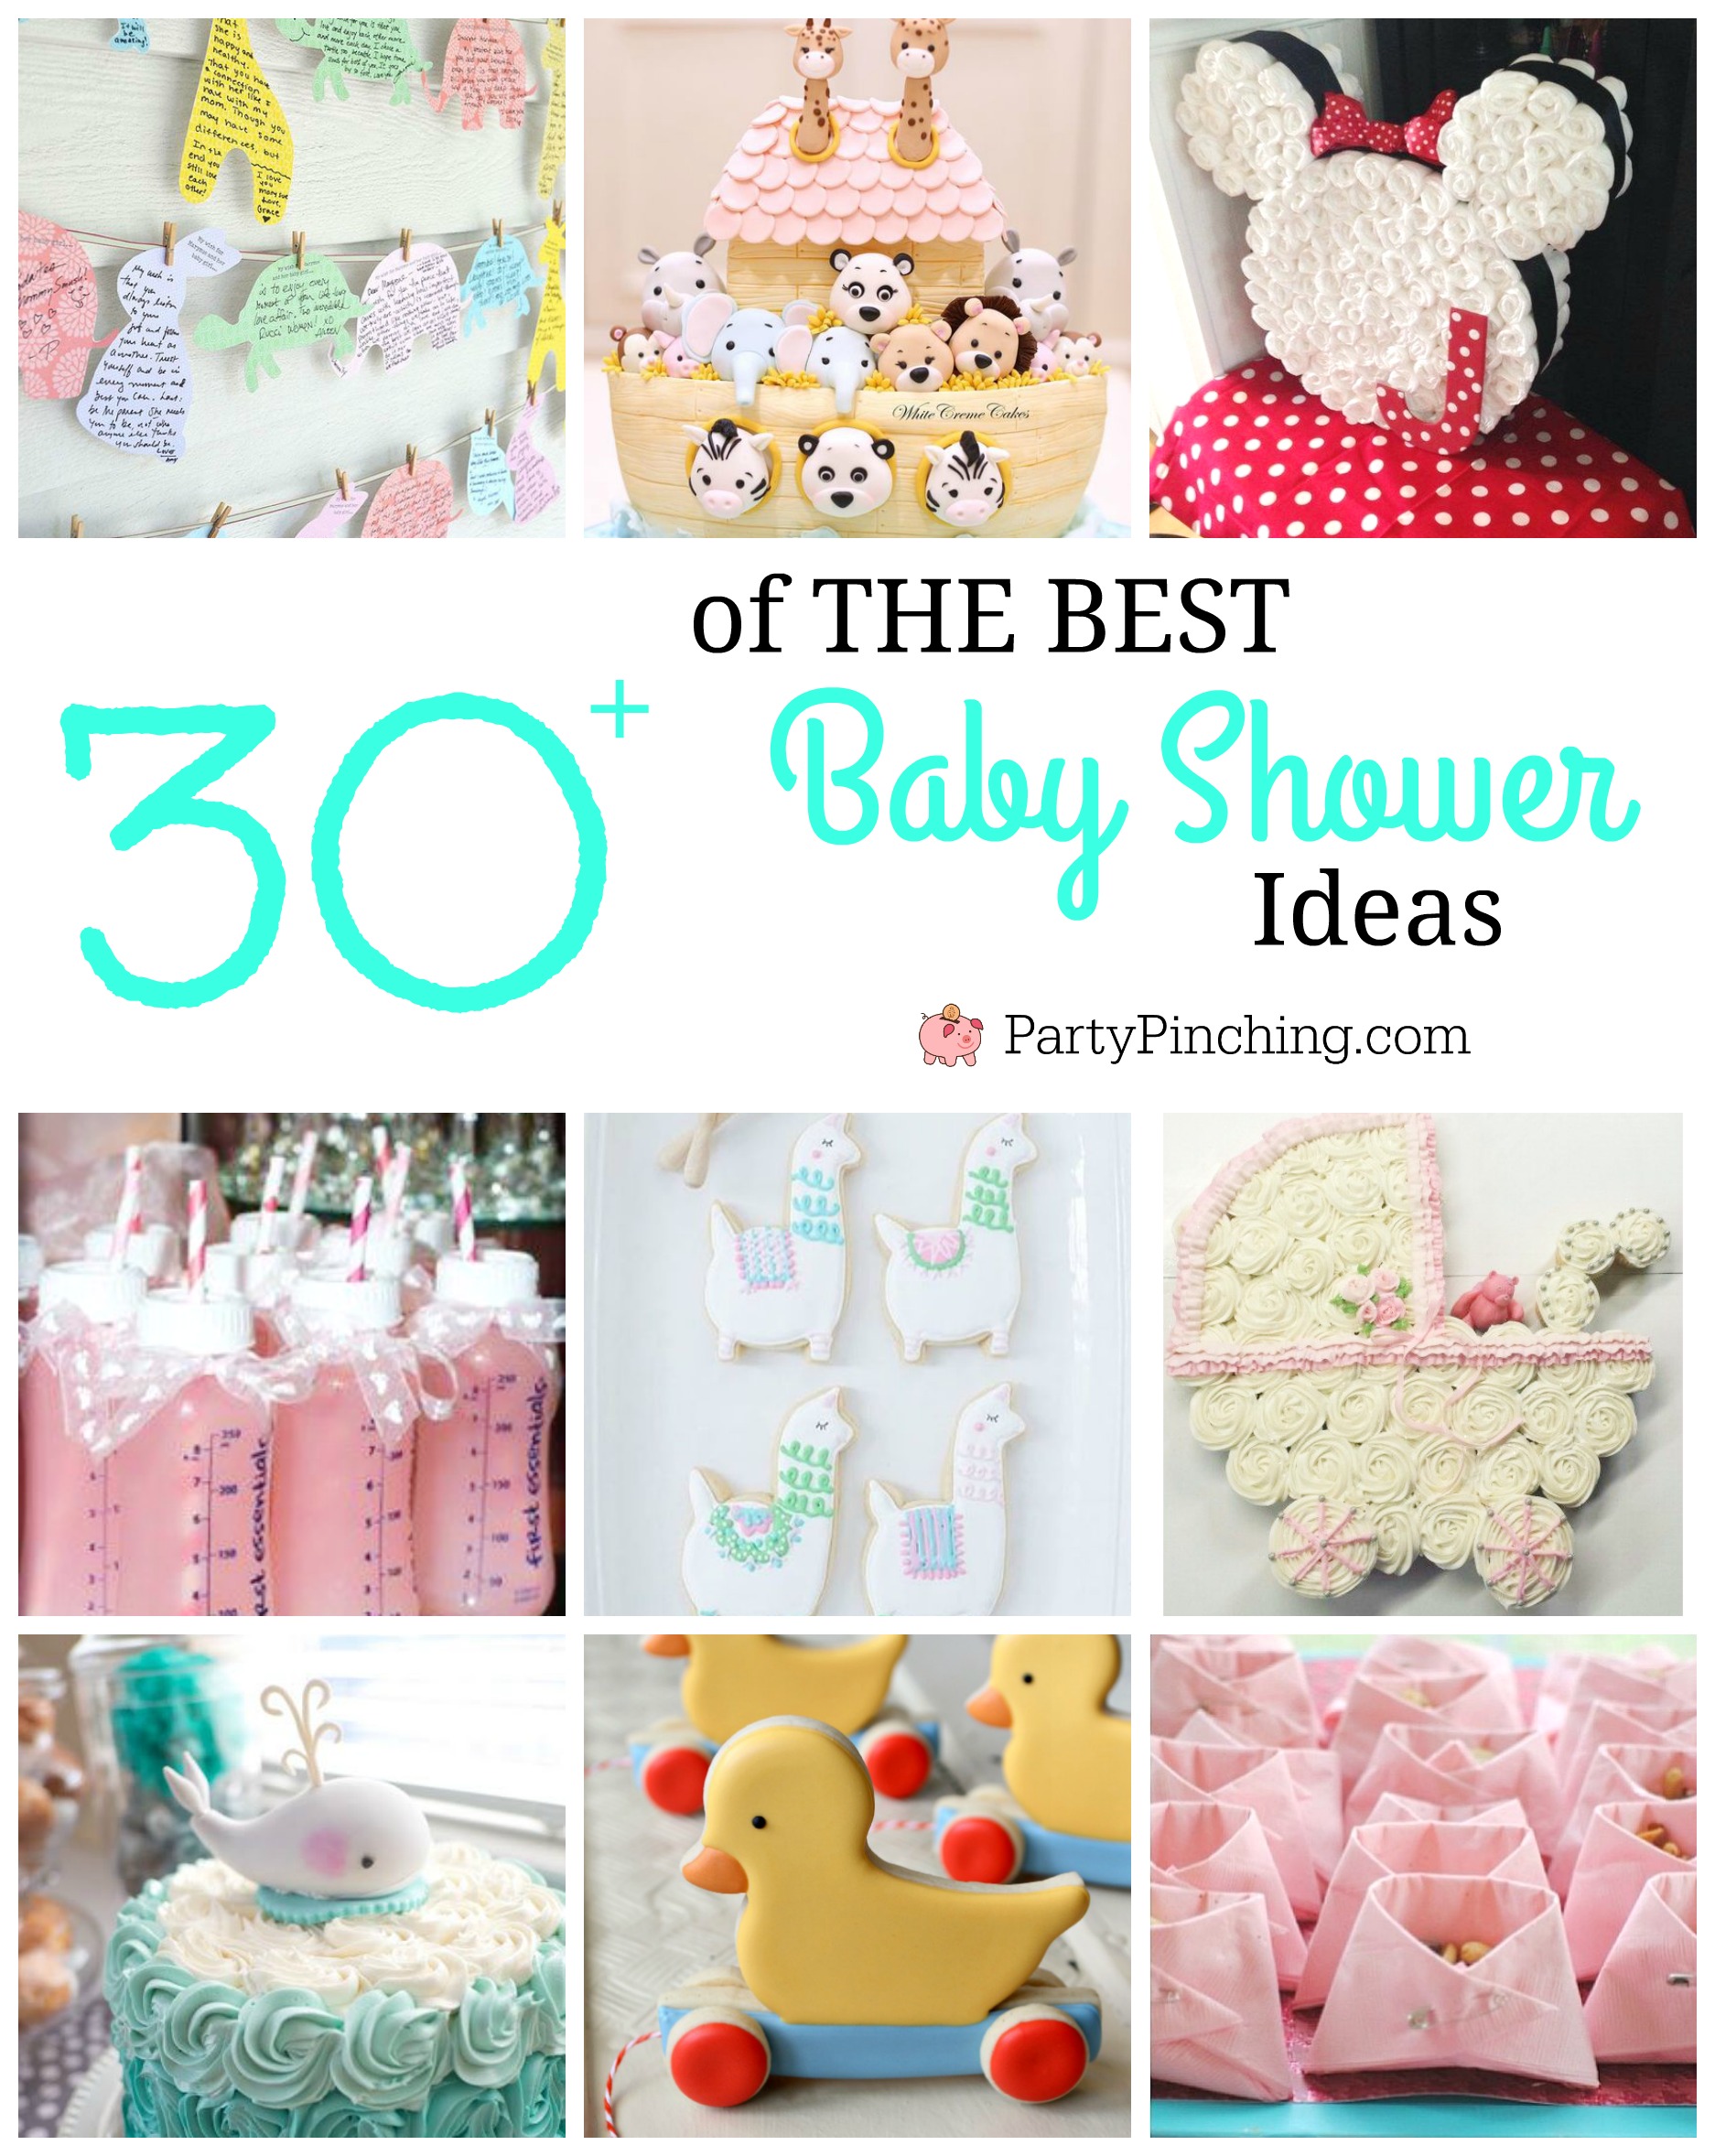 Games to play at baby showers, boy themed baby showers, baby shower ideas, cute baby shower, best baby shower ideas, baby shower cake, fun games for baby shower, baby shower food